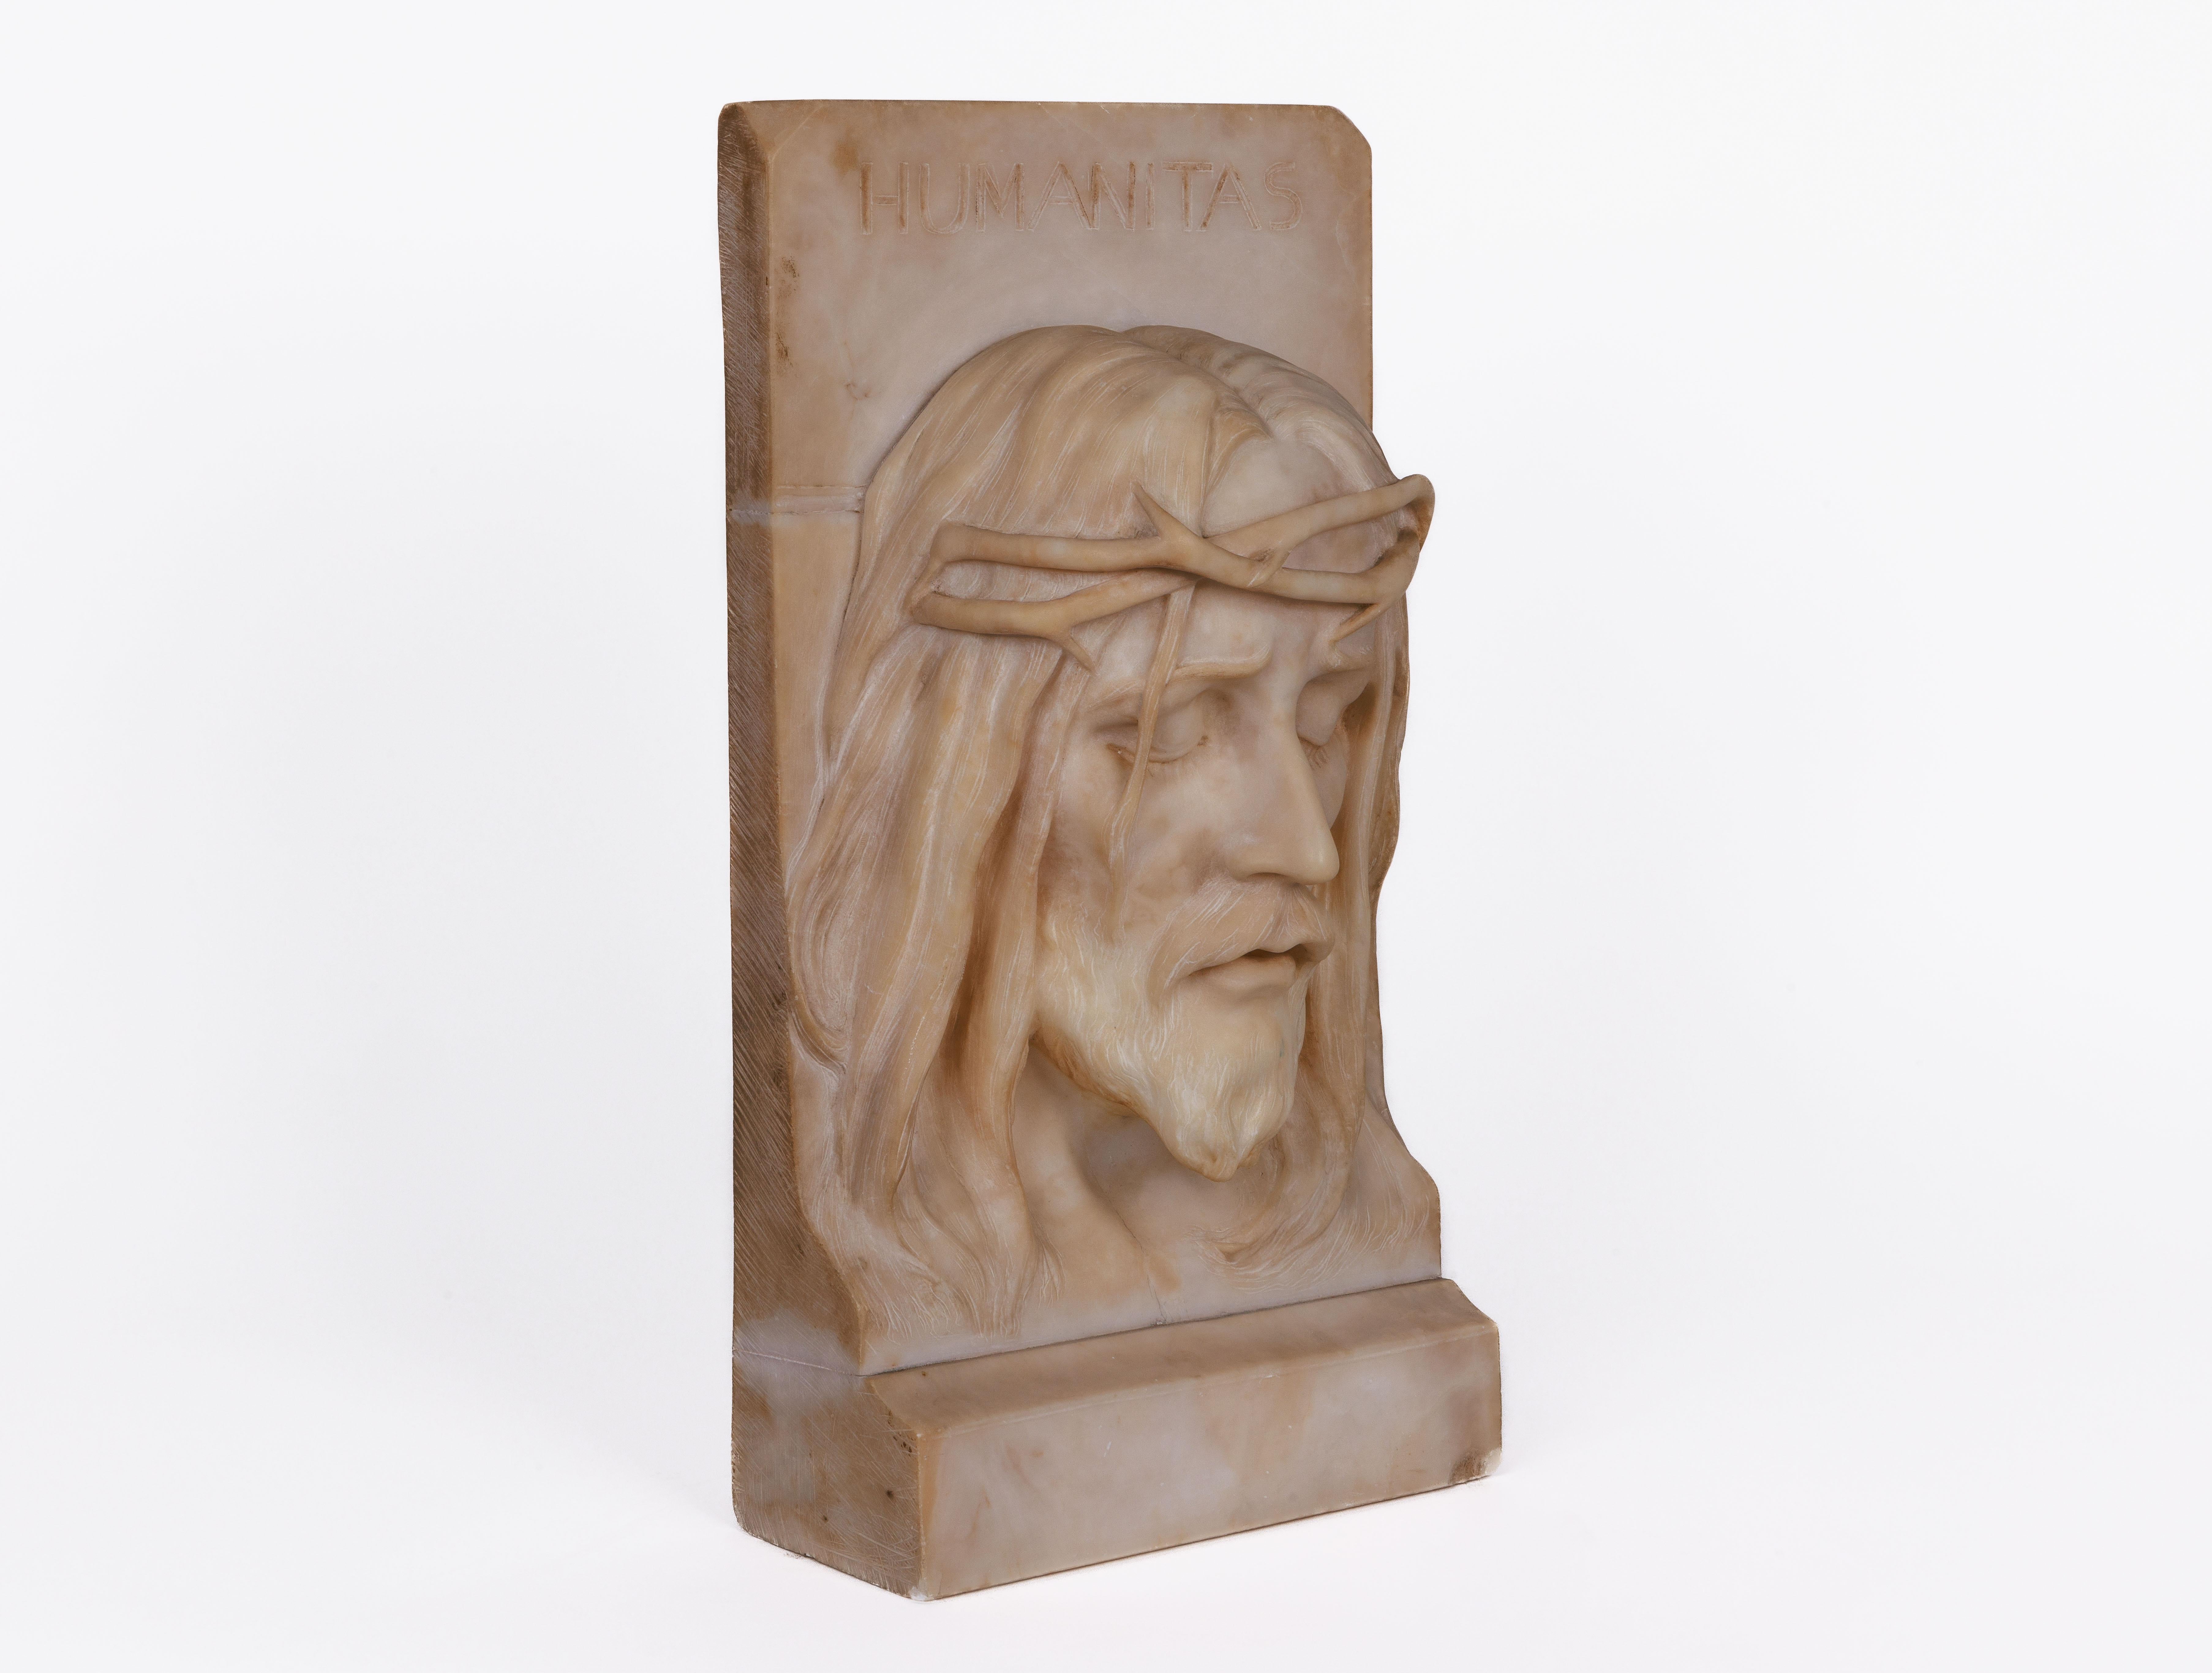 Rare and Important Italian Alabaster Bust Sculpture of Jesus Christ, C. 1860 For Sale 2